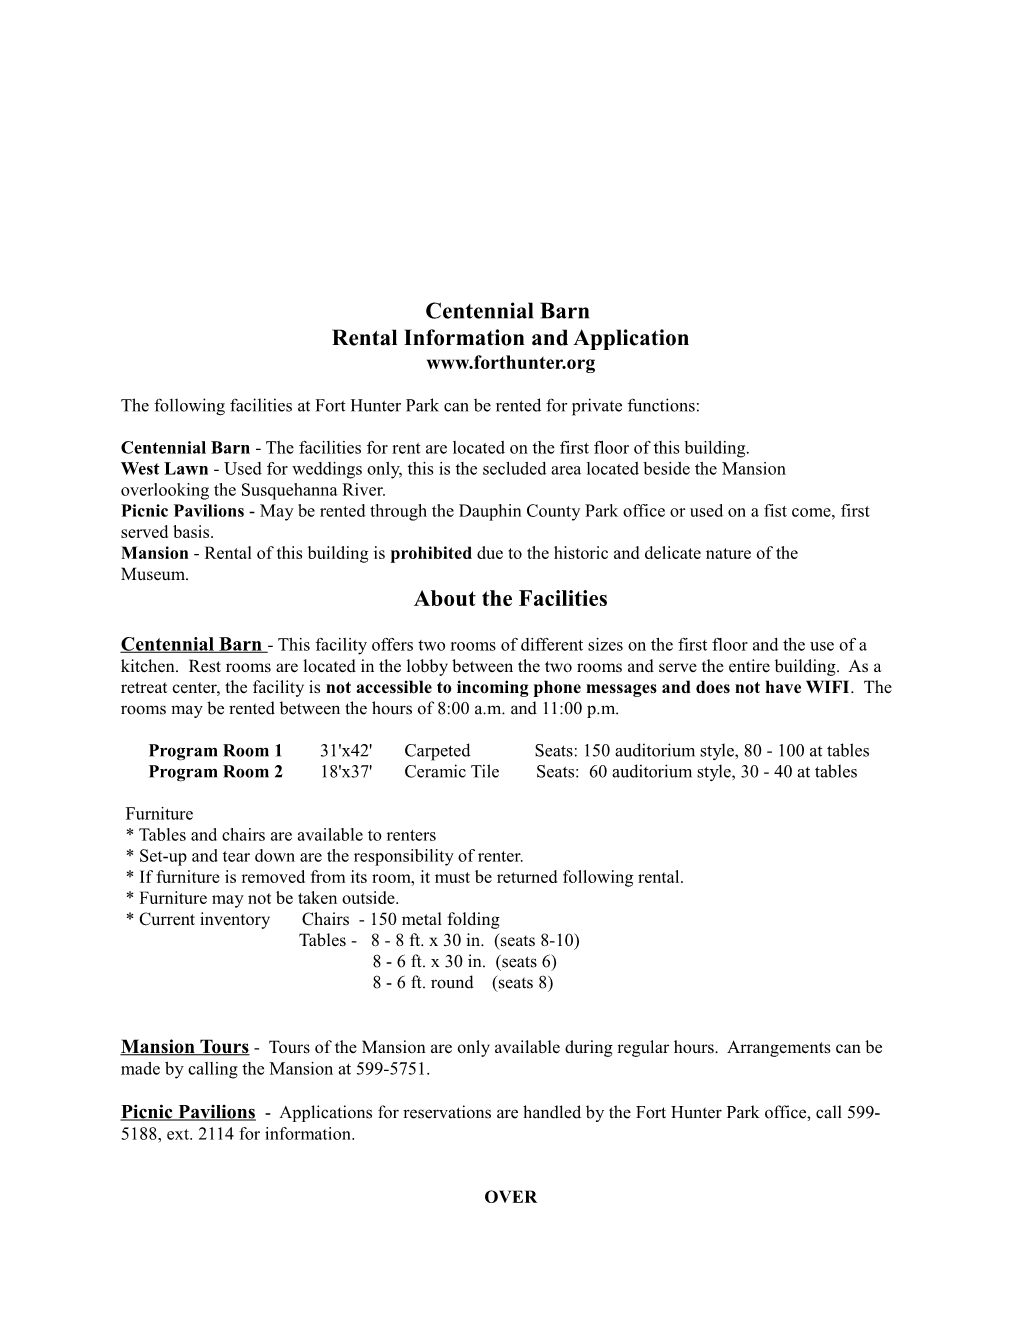 Rental Information and Application